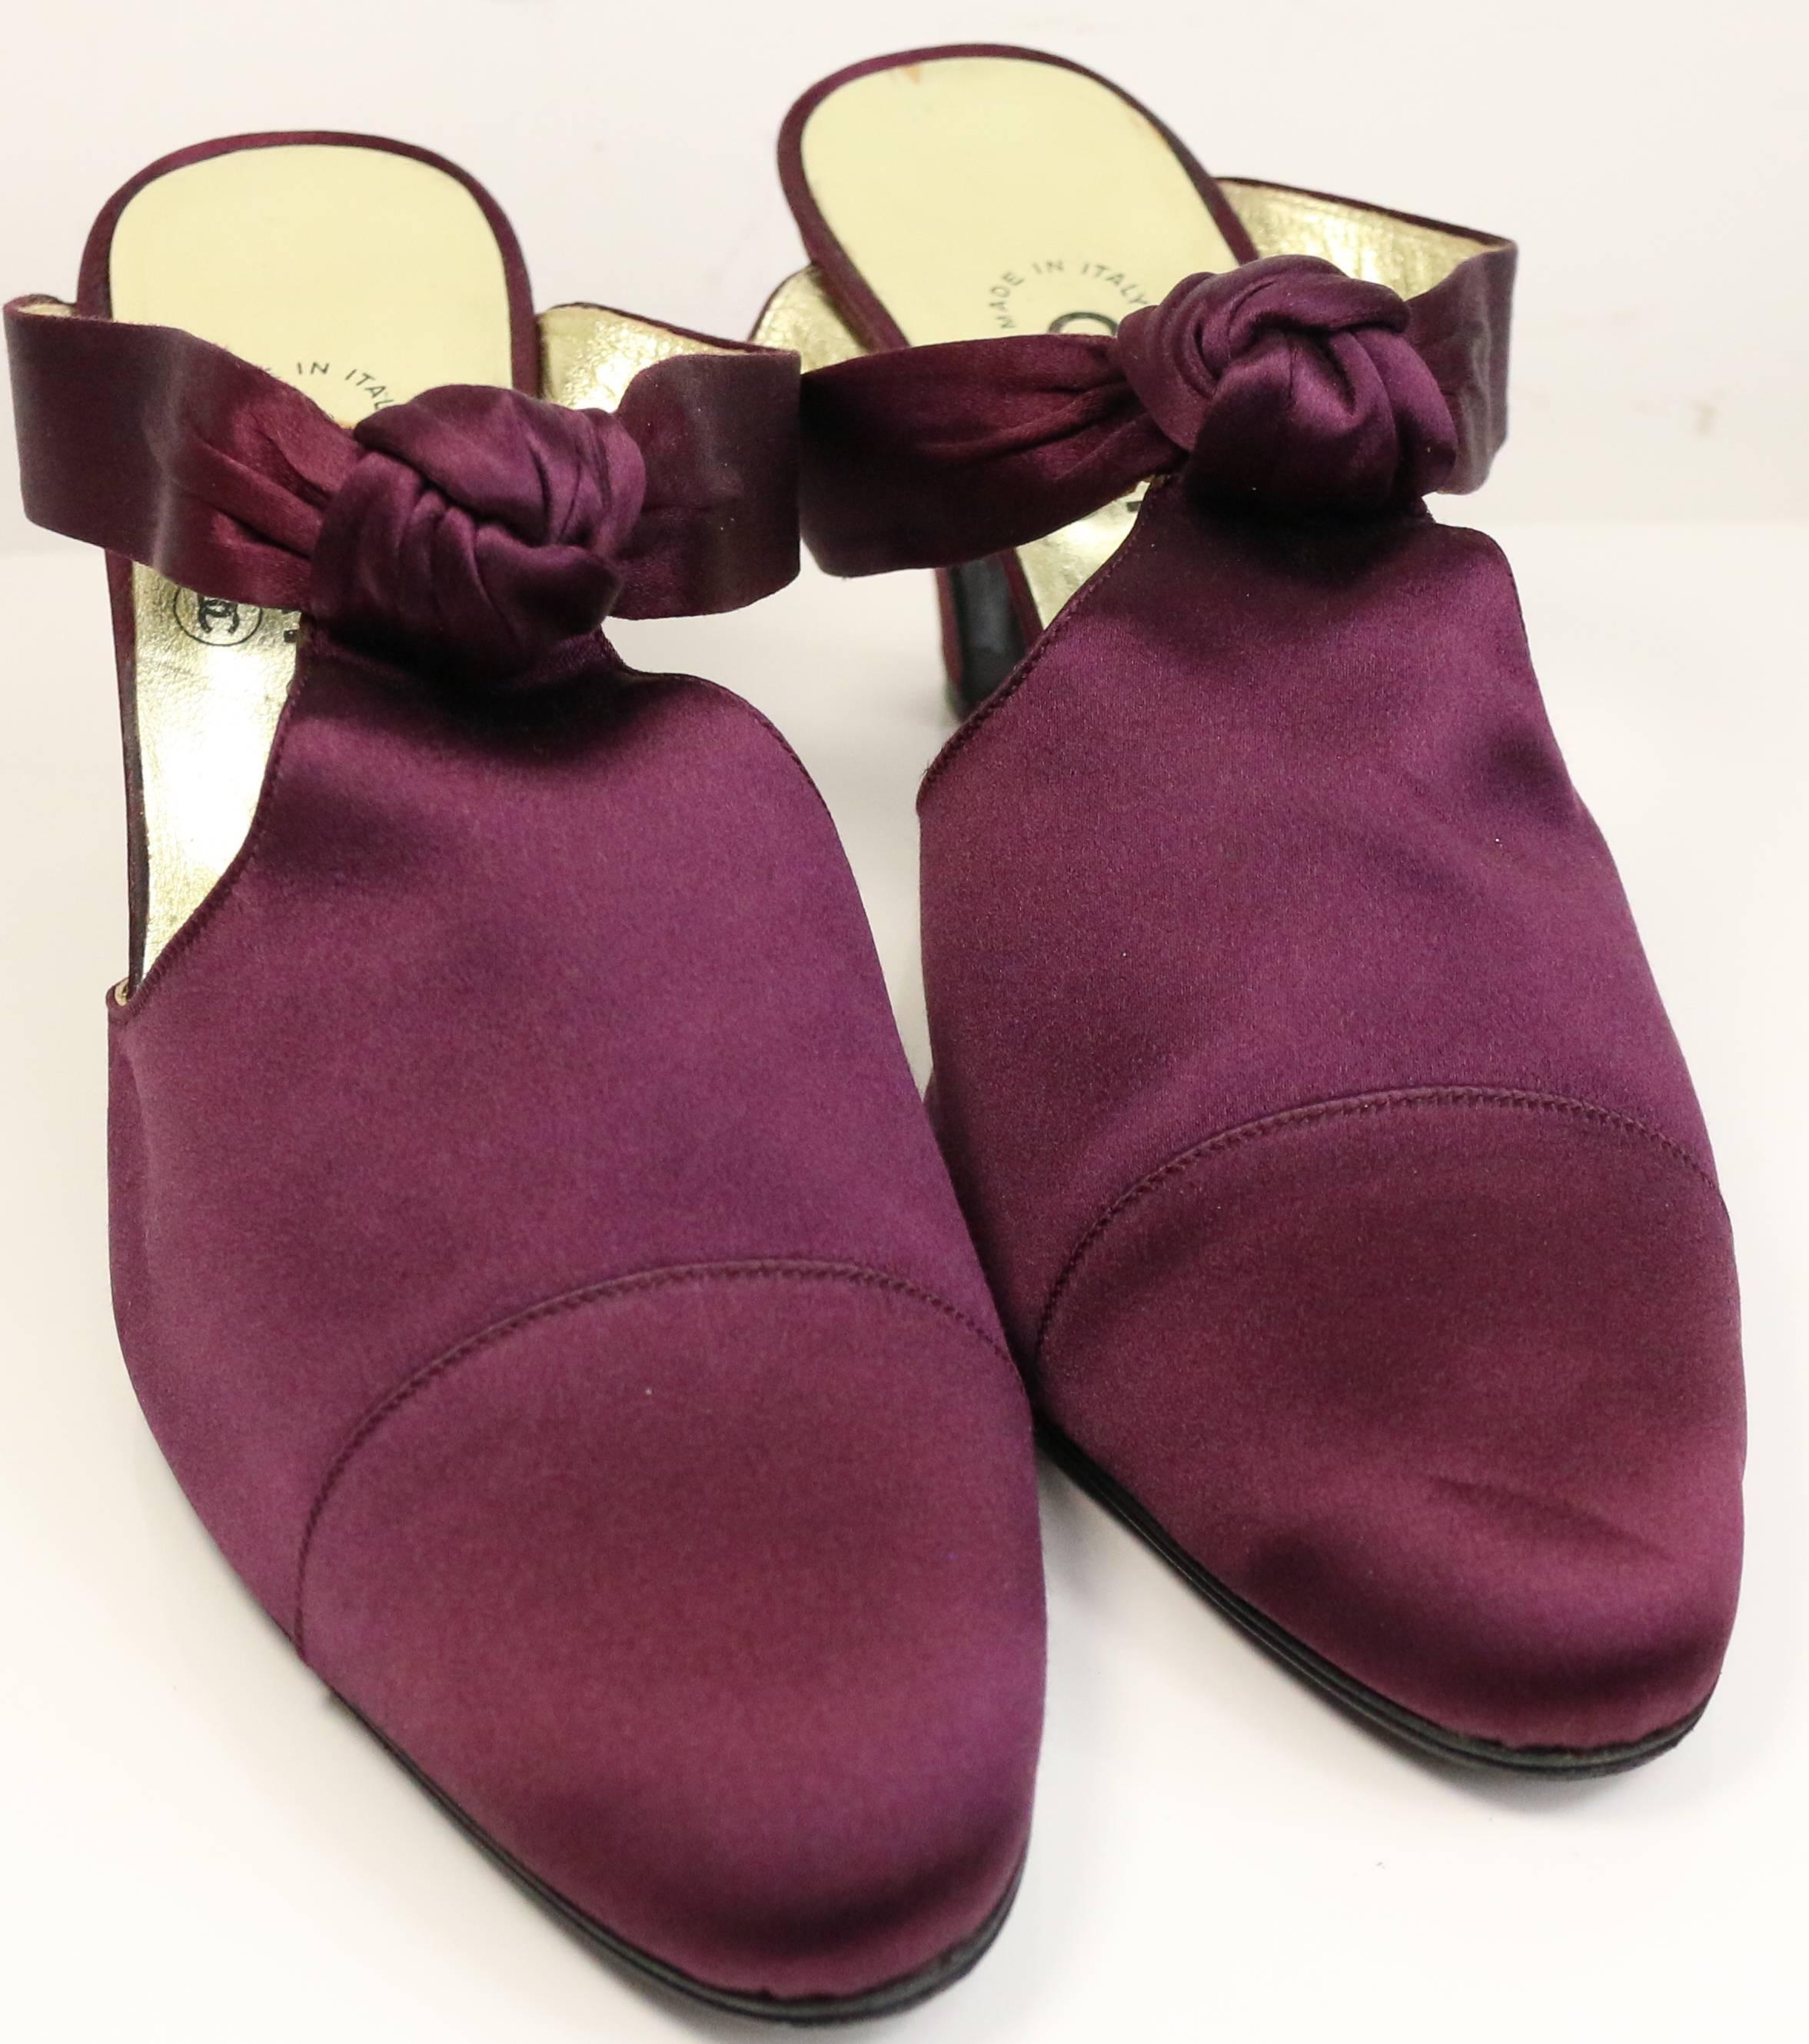 - Vintage 90s Chanel purple satin shoes with knot. 

- Made in Italy. 

- Size 38.5. 
